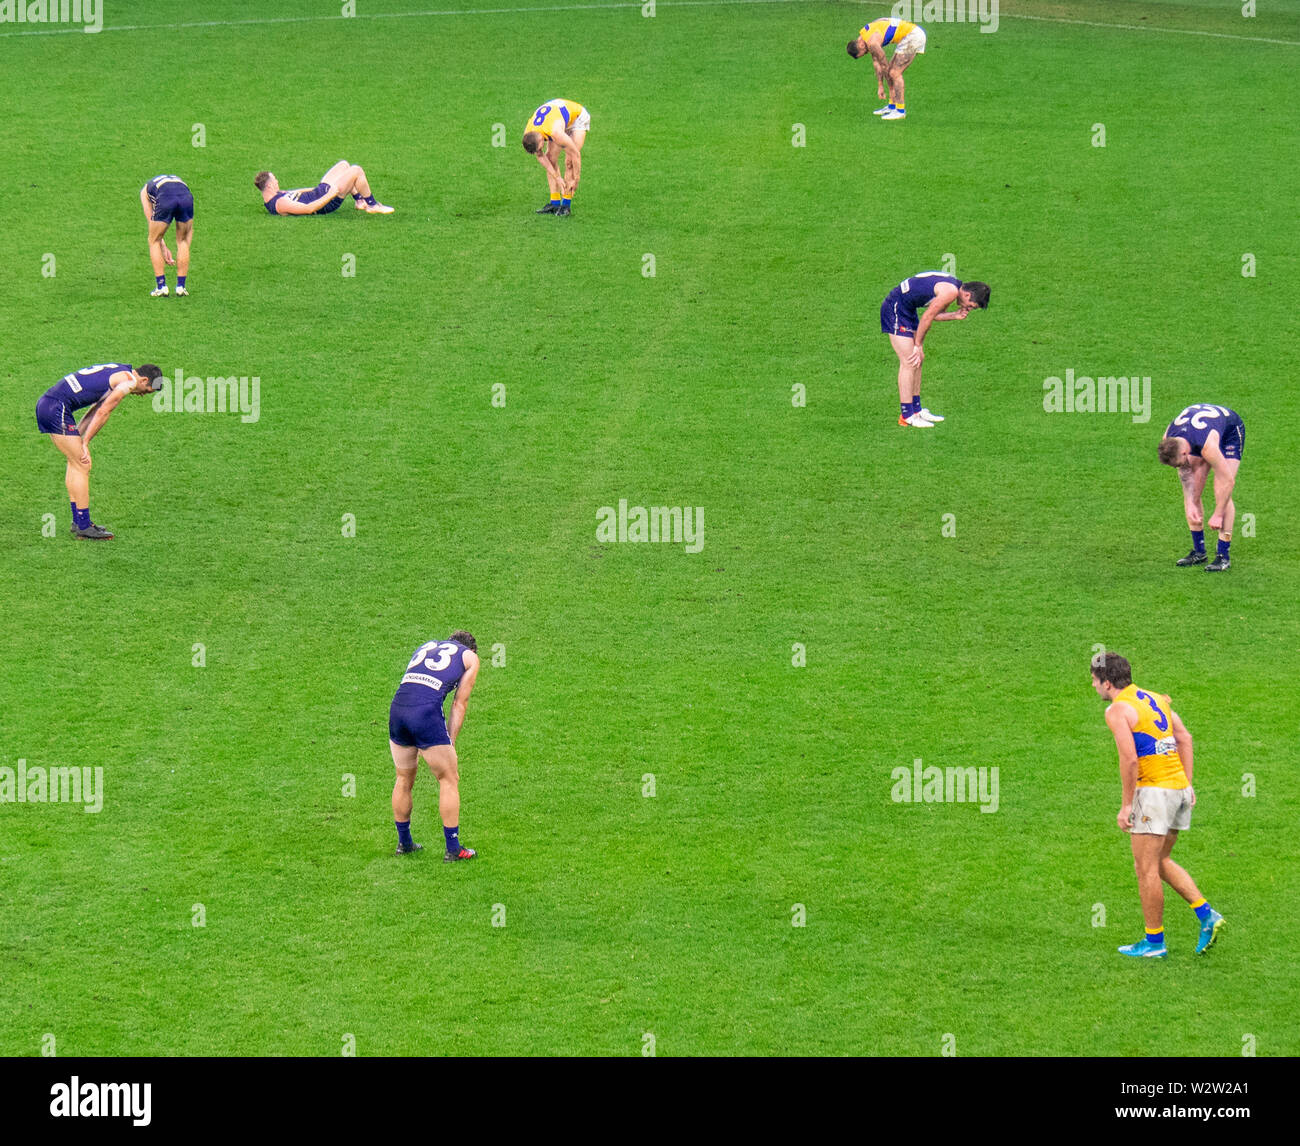 West Coast Eagles and Fremantle Dockers football players after the Western Derby AFL game at Optus Stadium Perth Western Australia. Stock Photo